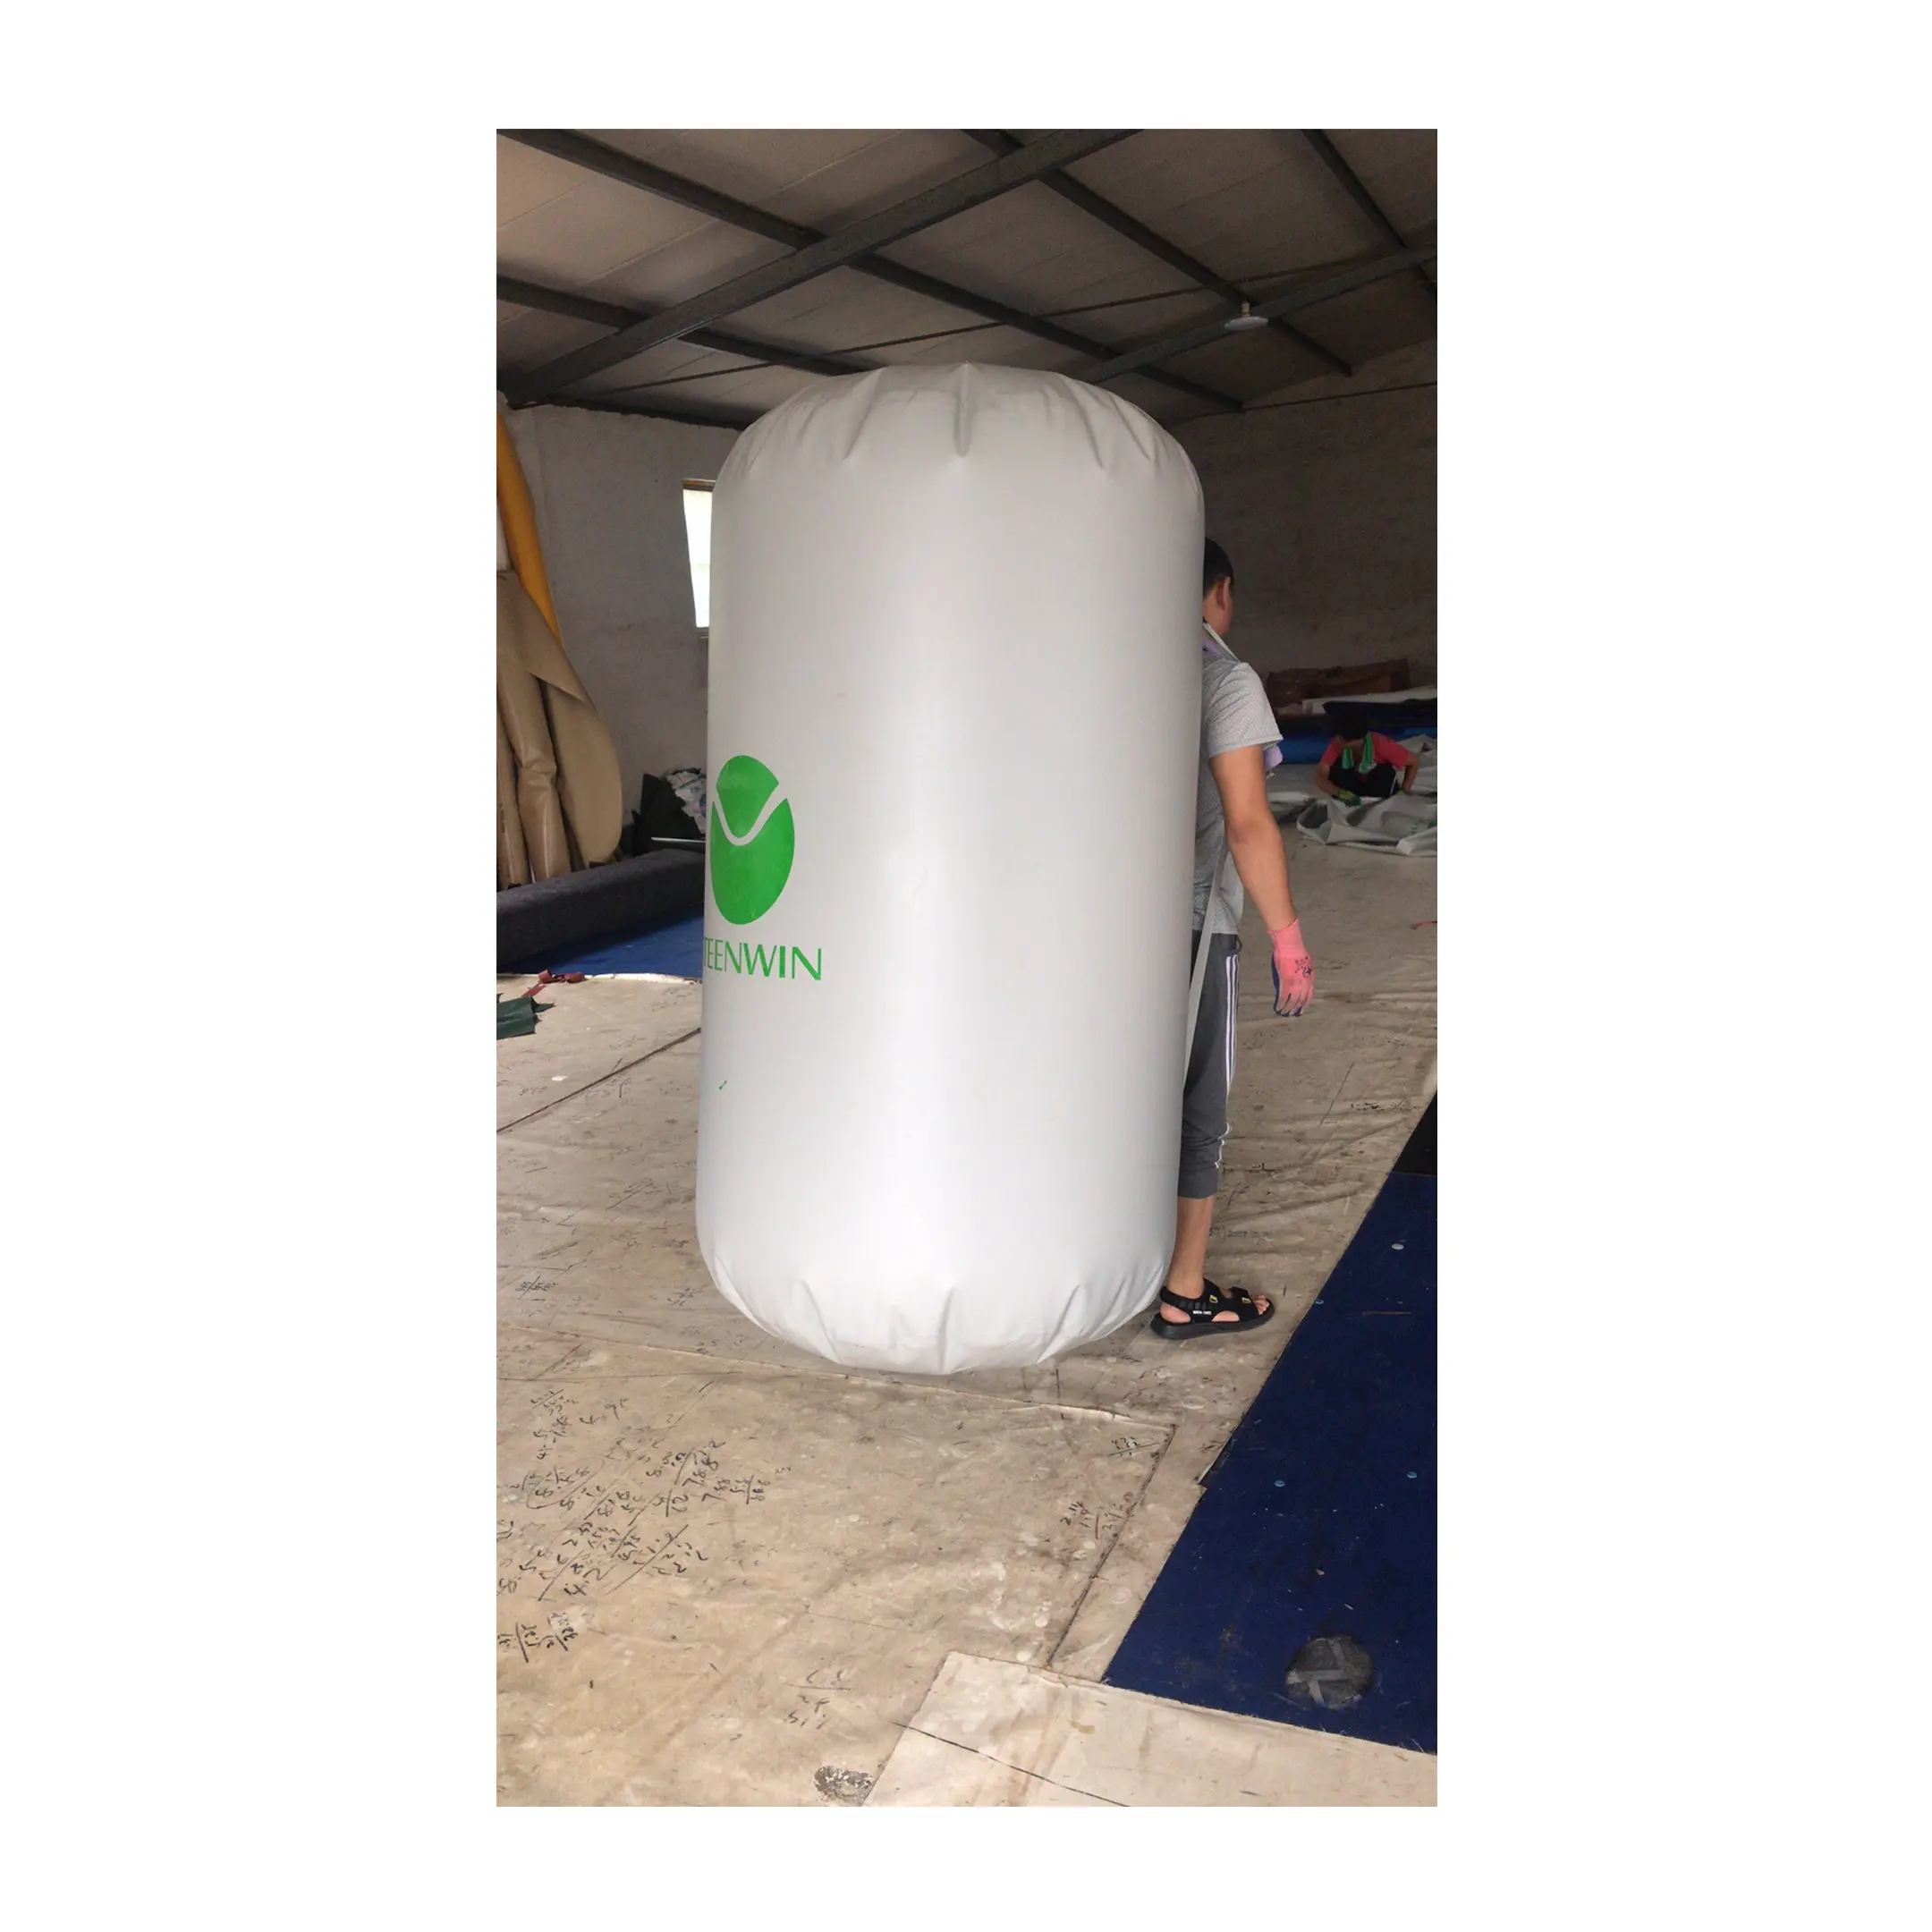 Teenwin Biogas Plant Use Durable Biogas Storage Bag for Storing Biogas